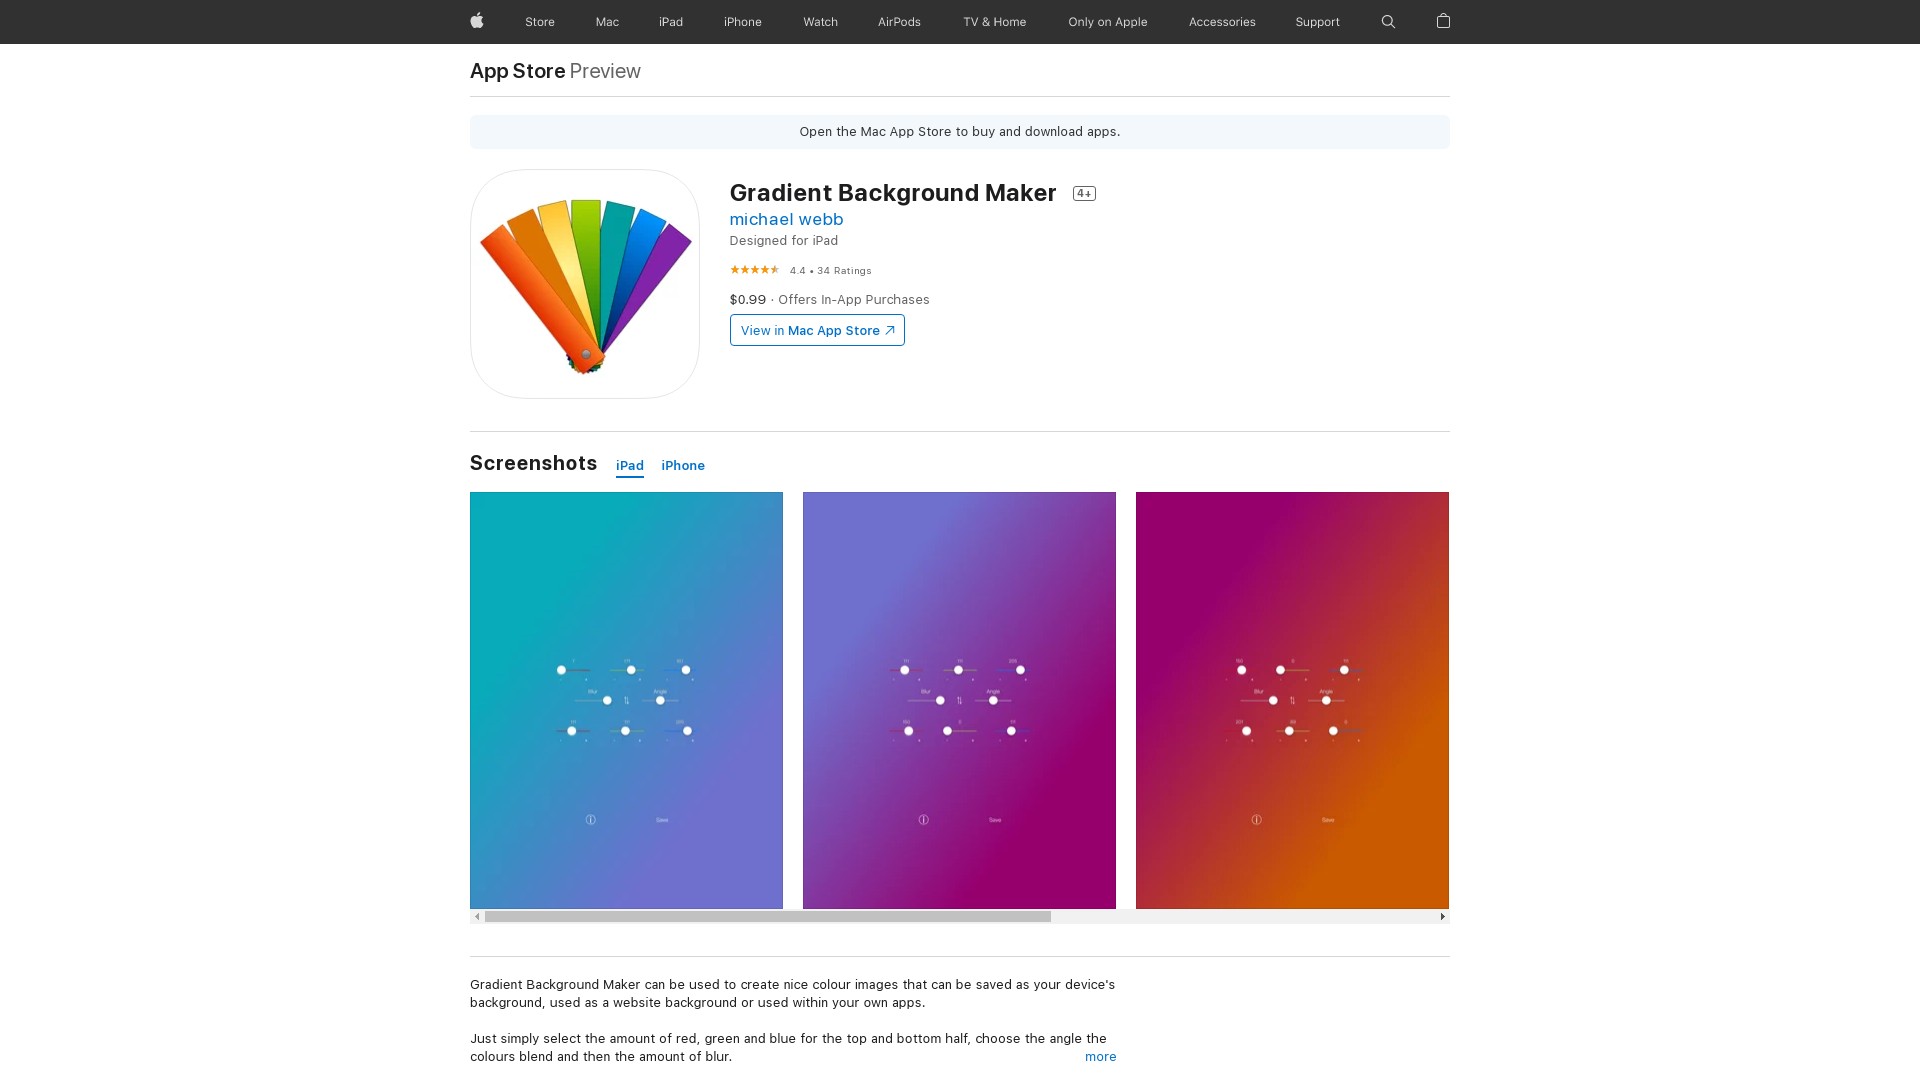 Gradient Background Maker can be used to create nice colour images that can be saved as your device's background.